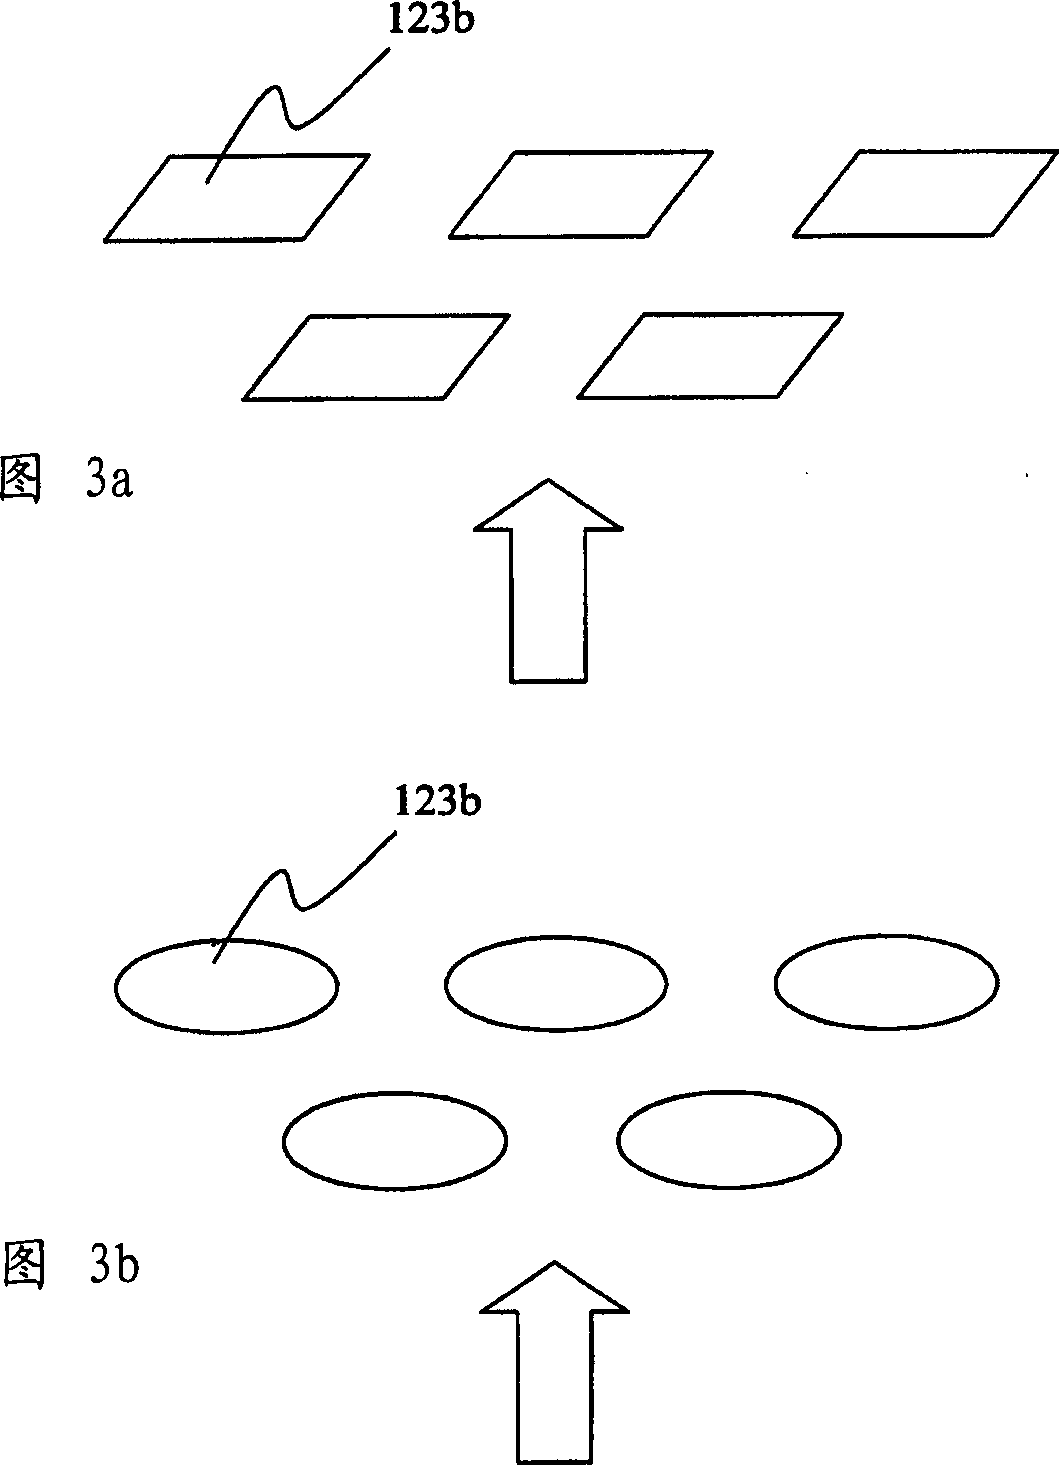 Electronic cyclotron resonance dusting device for treatment of glass chip or chip